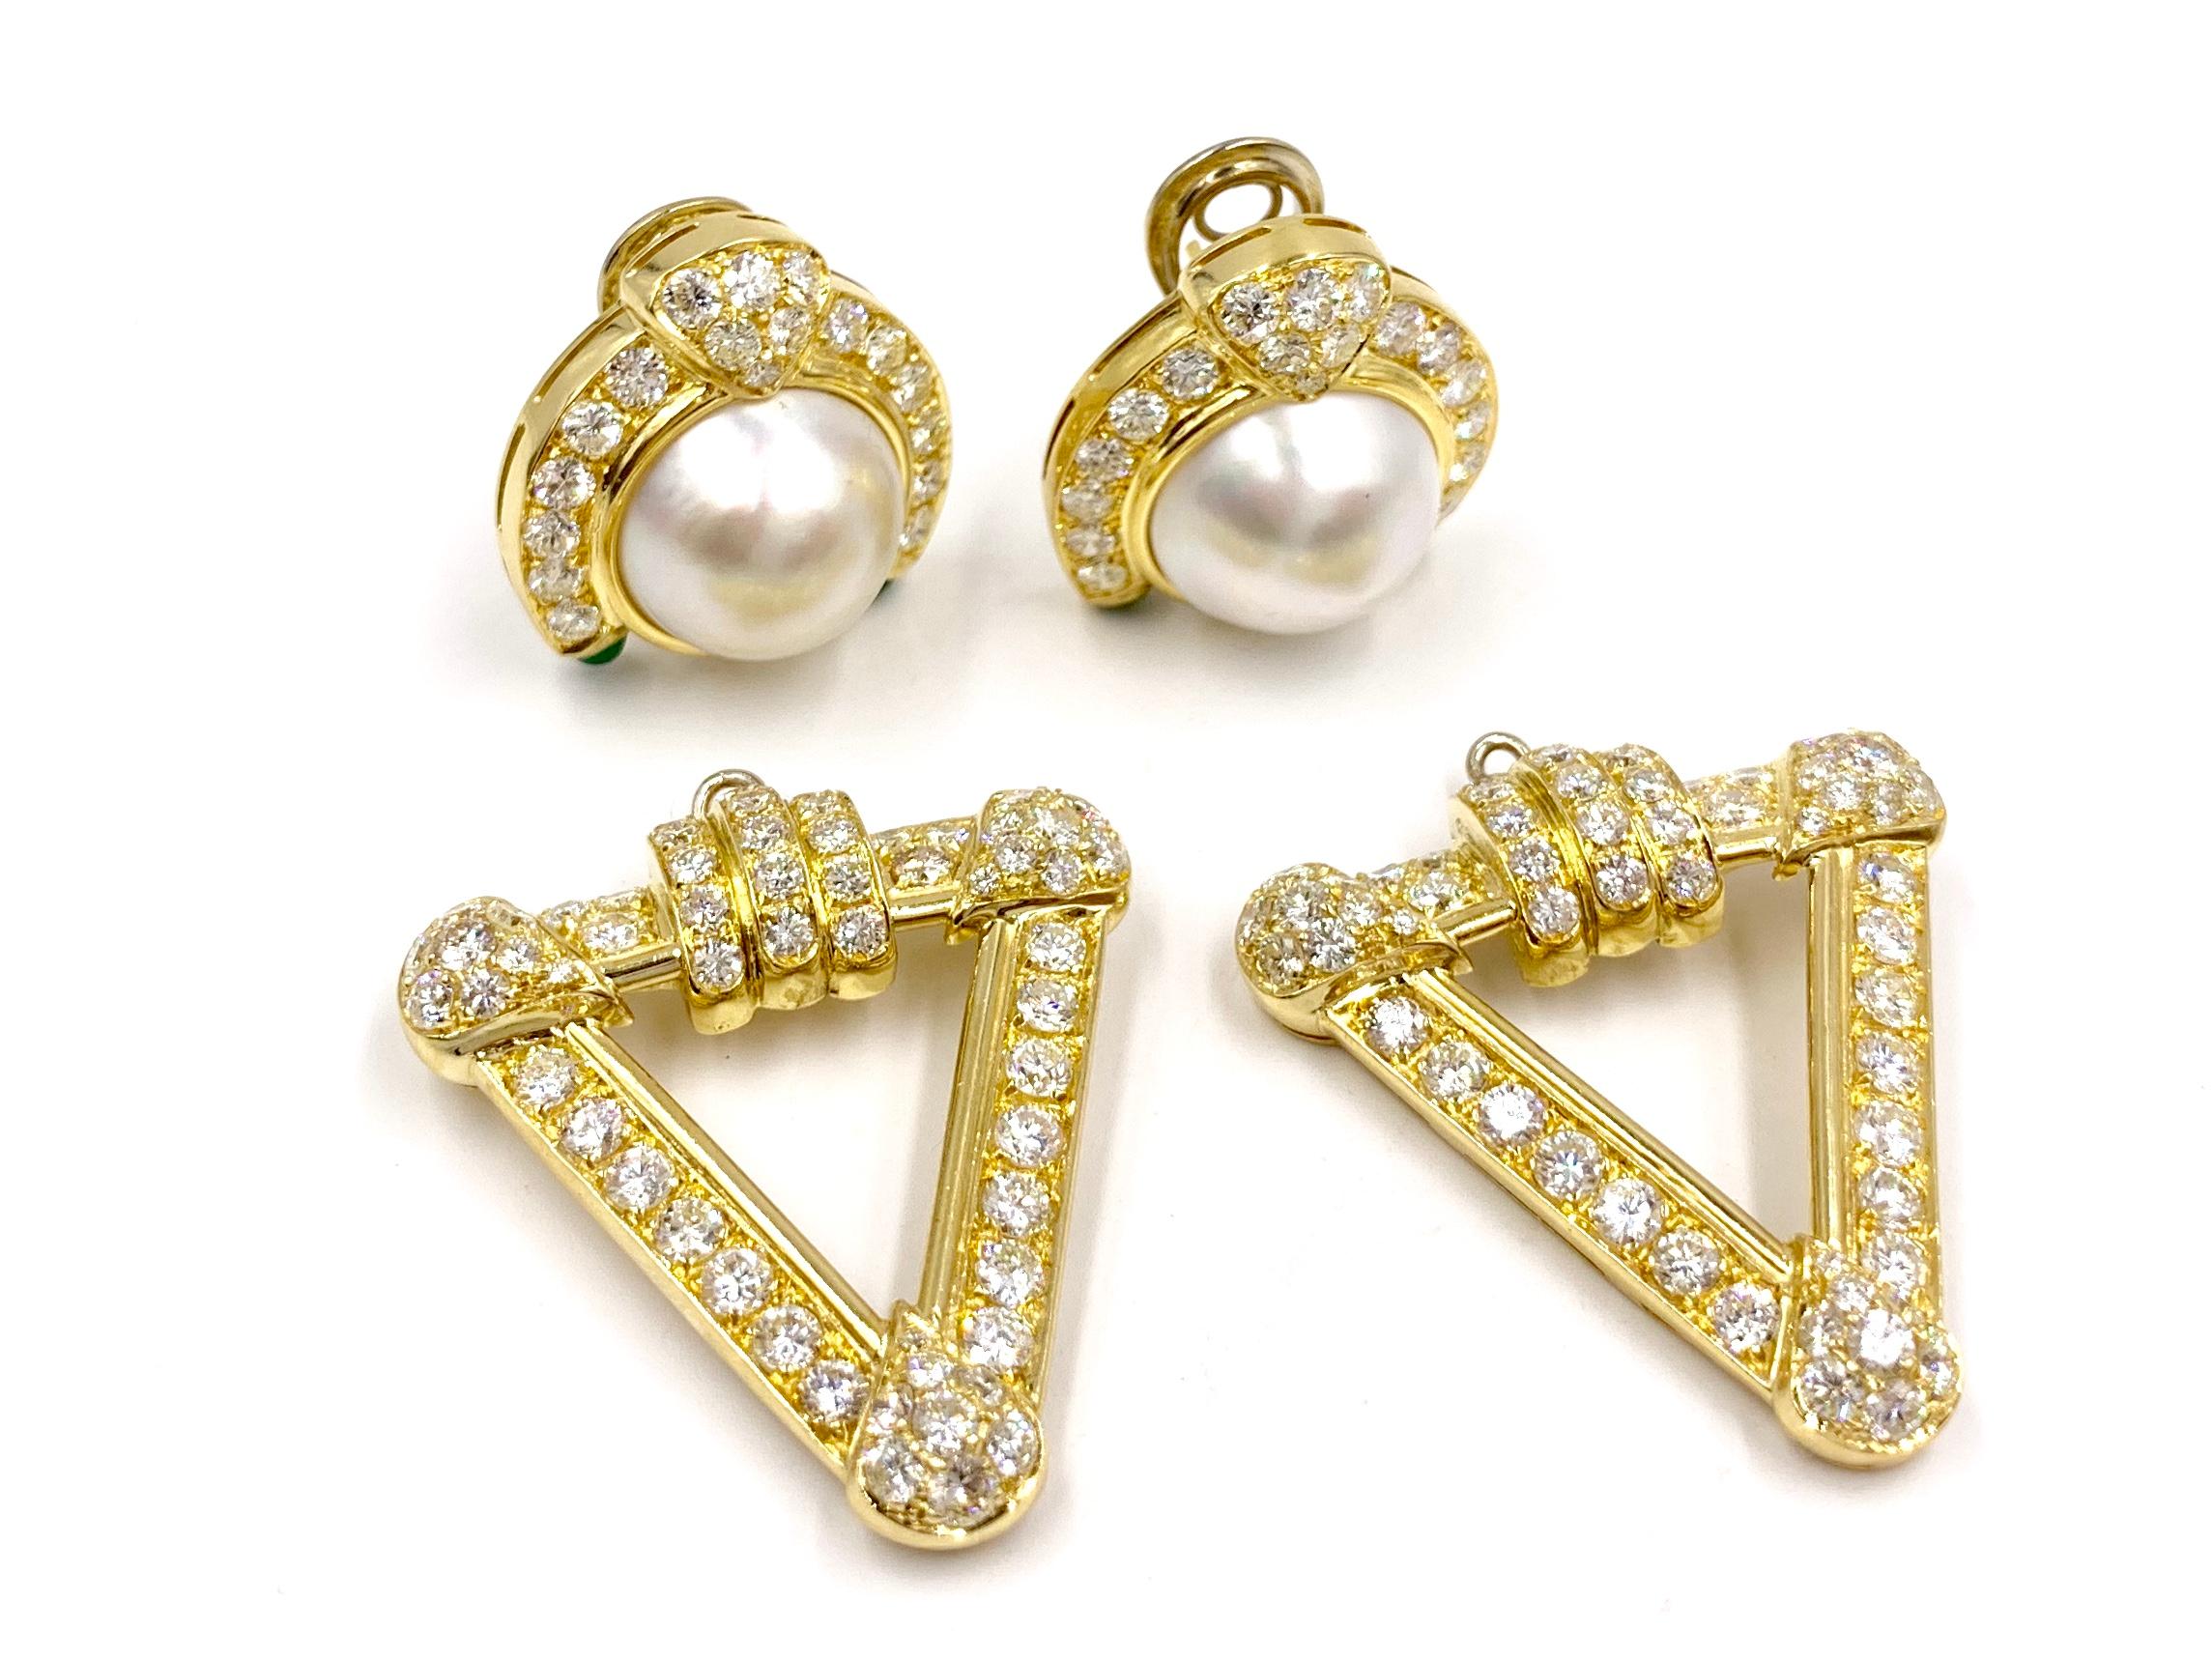 Diamond, Mabe Pearl and Emerald 18 Karat Convertible Earrings In Excellent Condition For Sale In Pikesville, MD